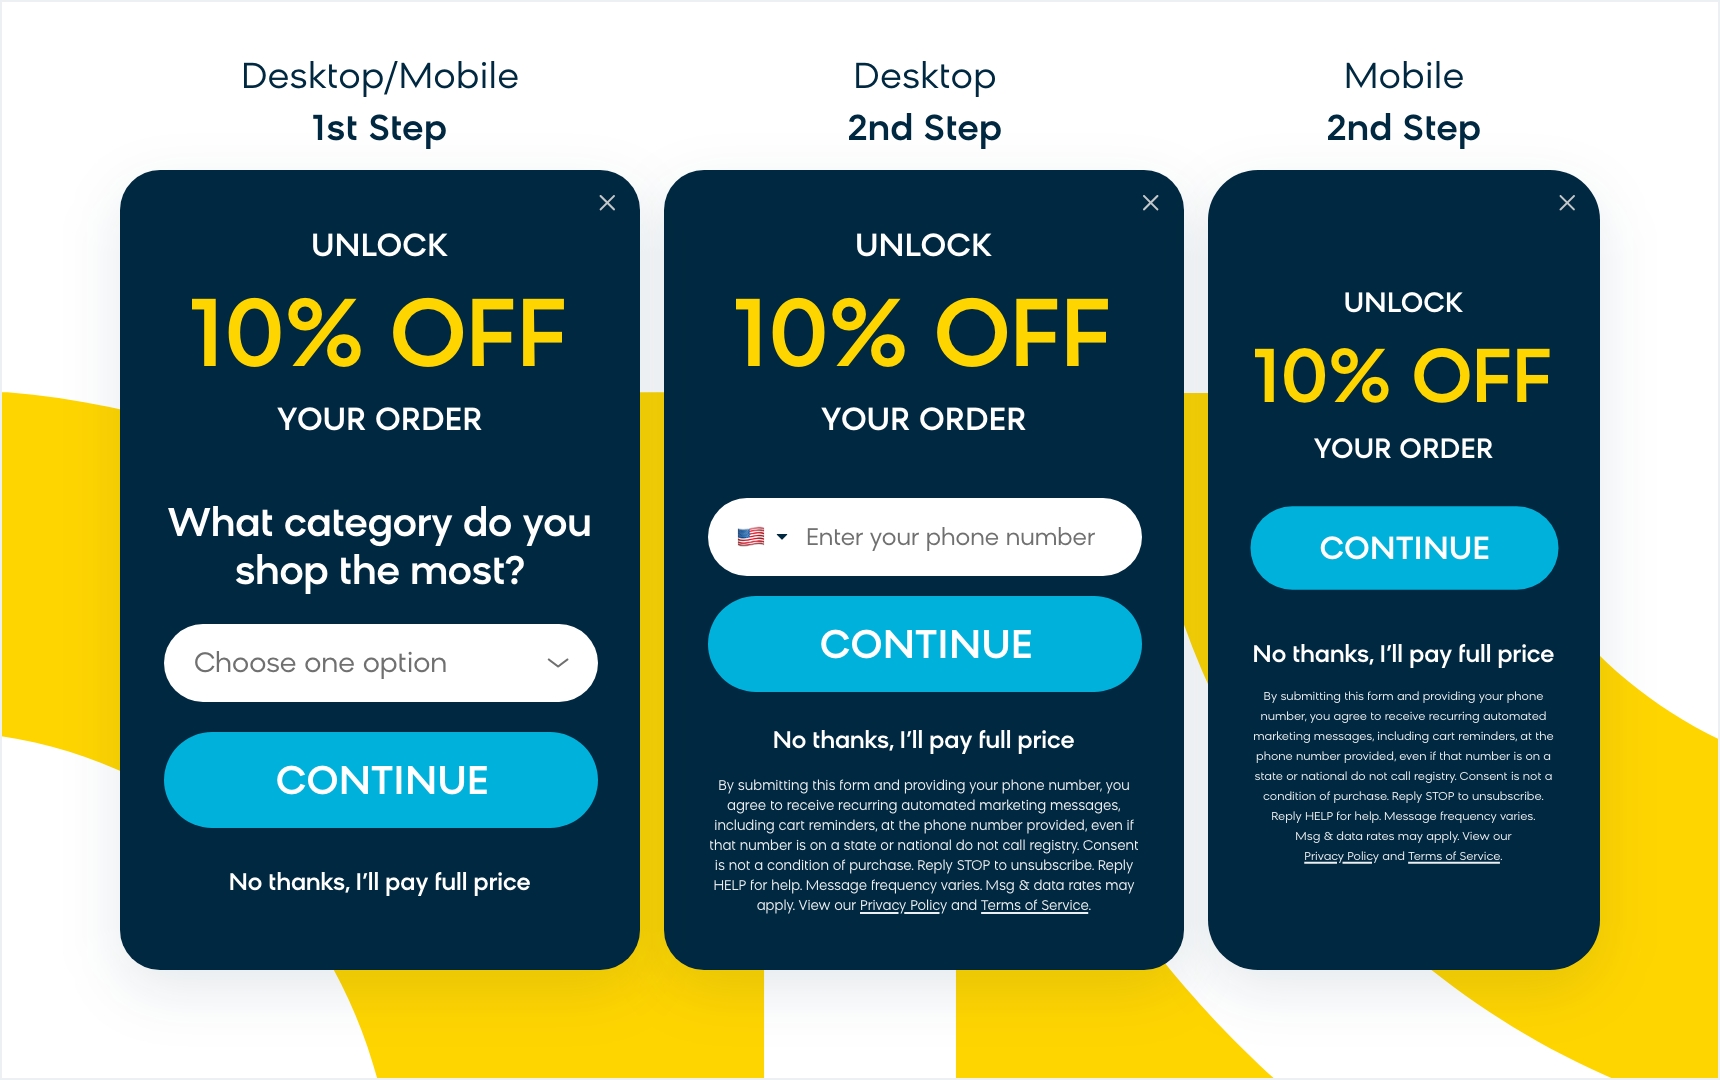 Examples of desktop and mobile banners used for capturing opt-ins for SMS marketing campaigns